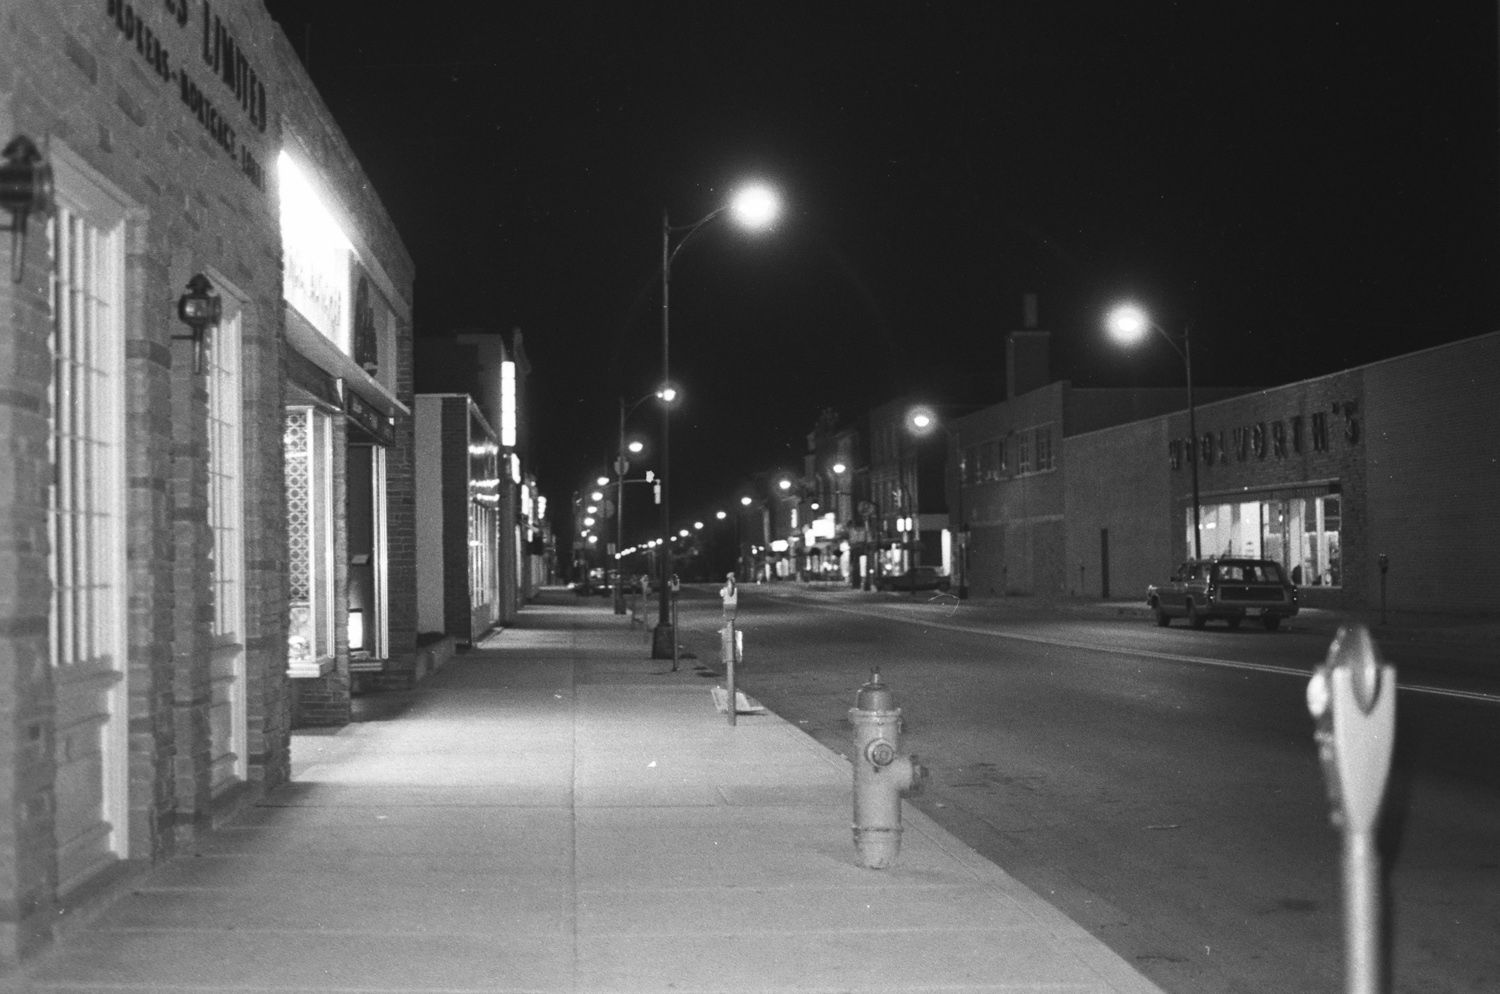 Simcoe Downtown at night - who forgot to roll up the street?